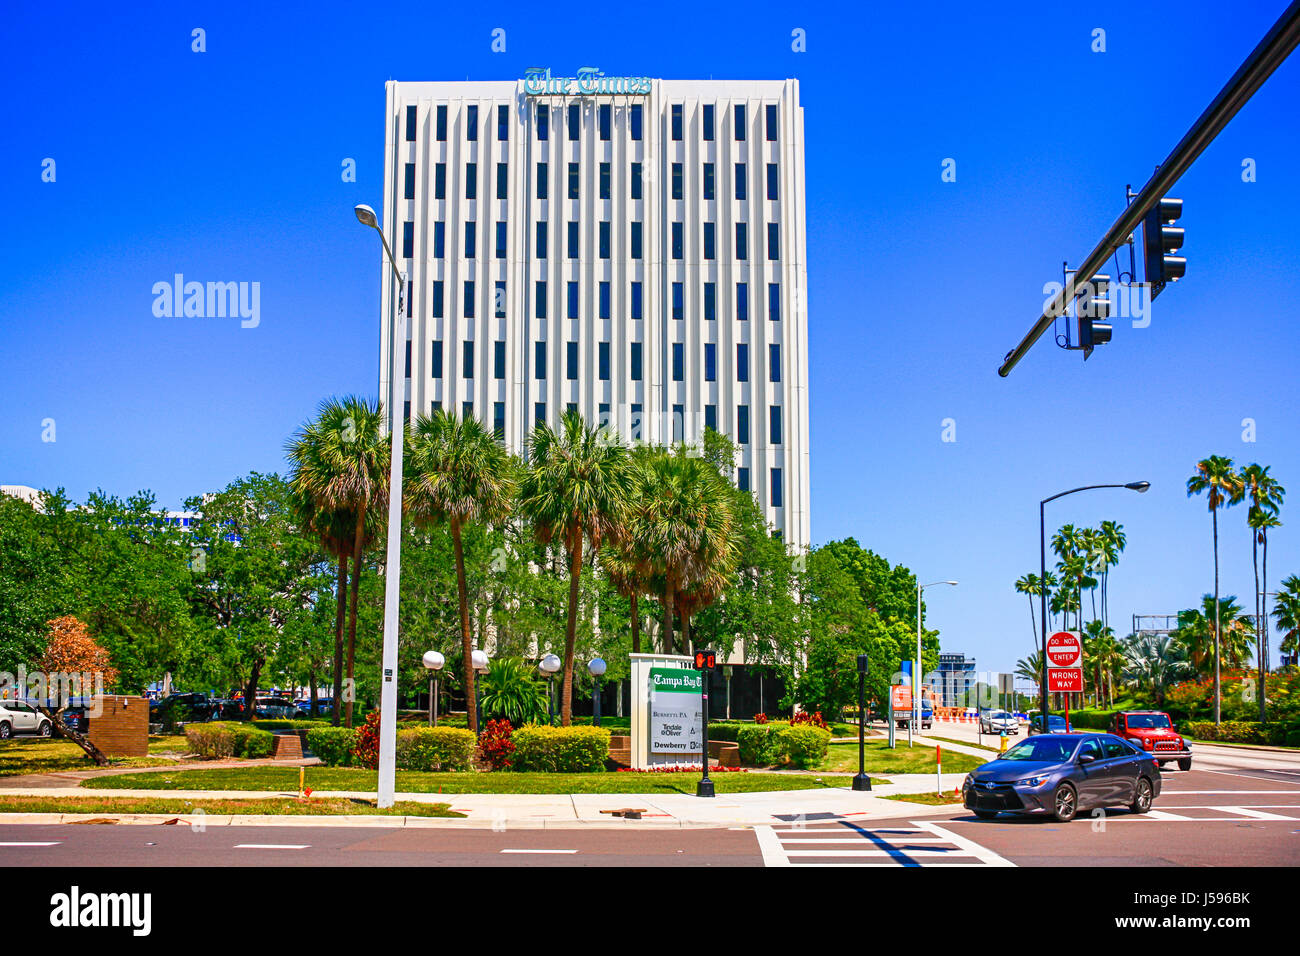 The Tampa Bay Time newspaper building in downtown Tampa Florida Stock Photo